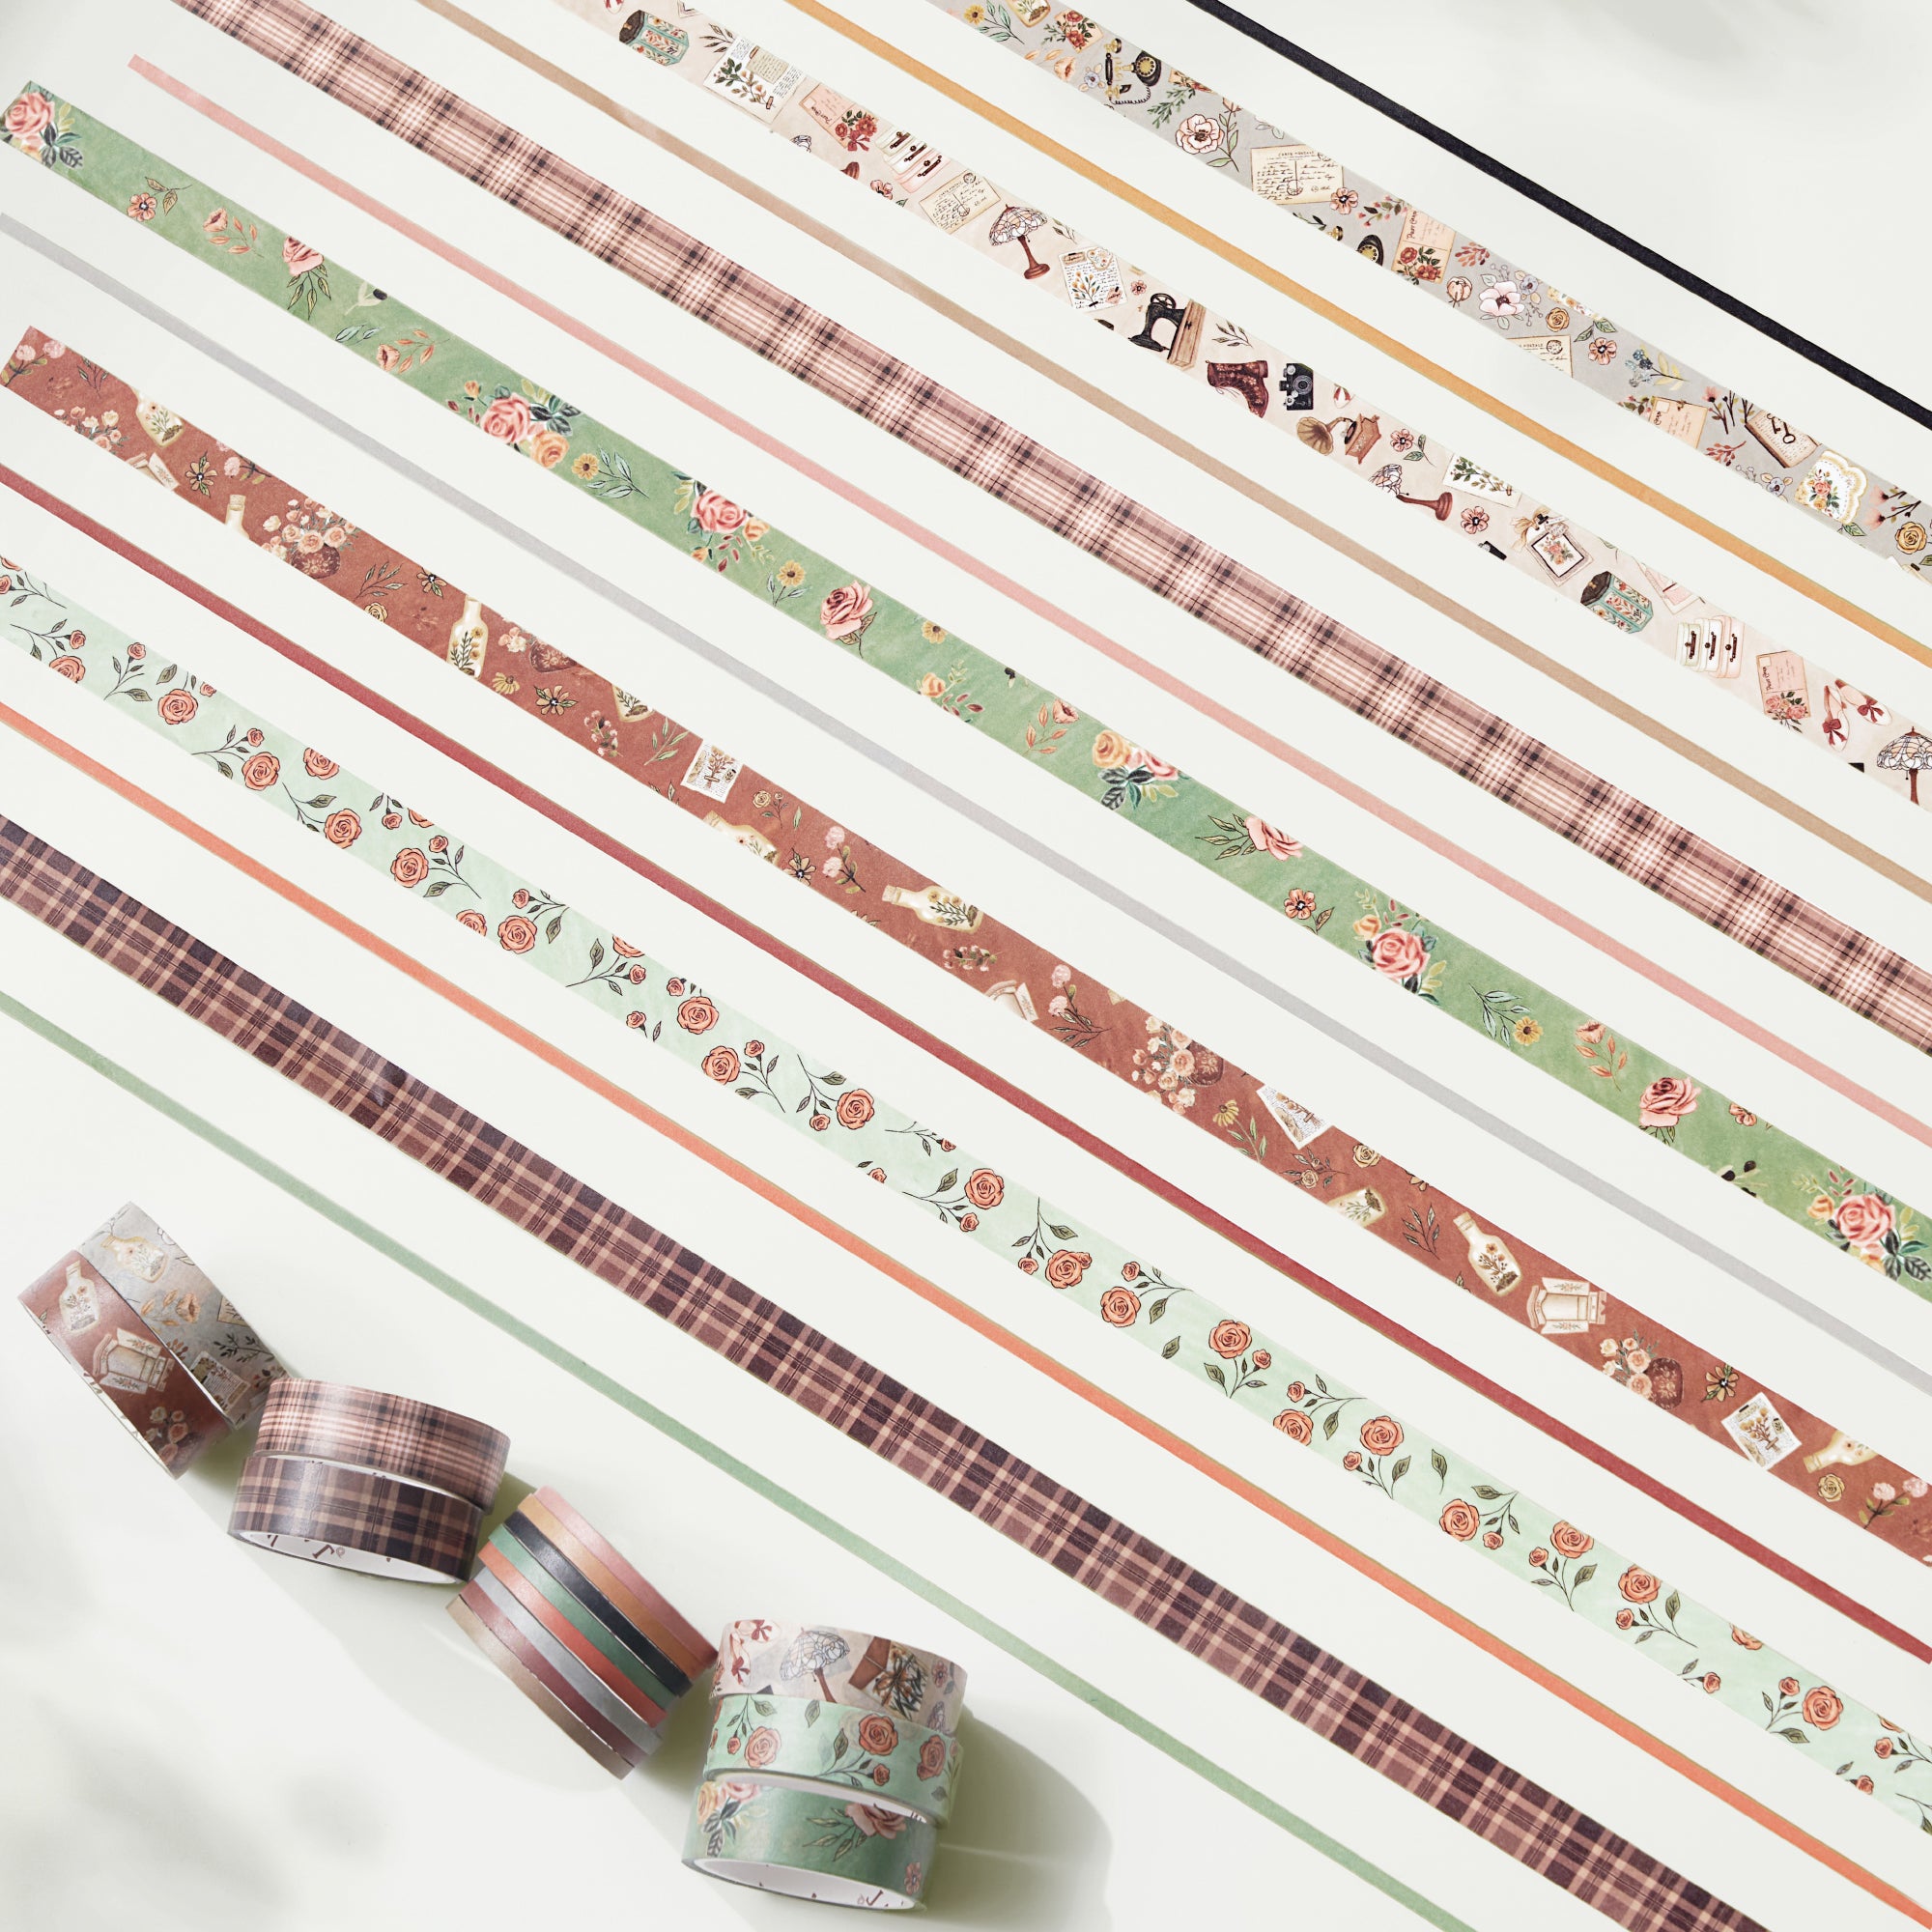 Fragrant Memories Washi Tape Set | The Washi Tape Shop. Beautiful Washi and Decorative Tape For Bullet Journals, Gift Wrapping, Planner Decoration and DIY Projects